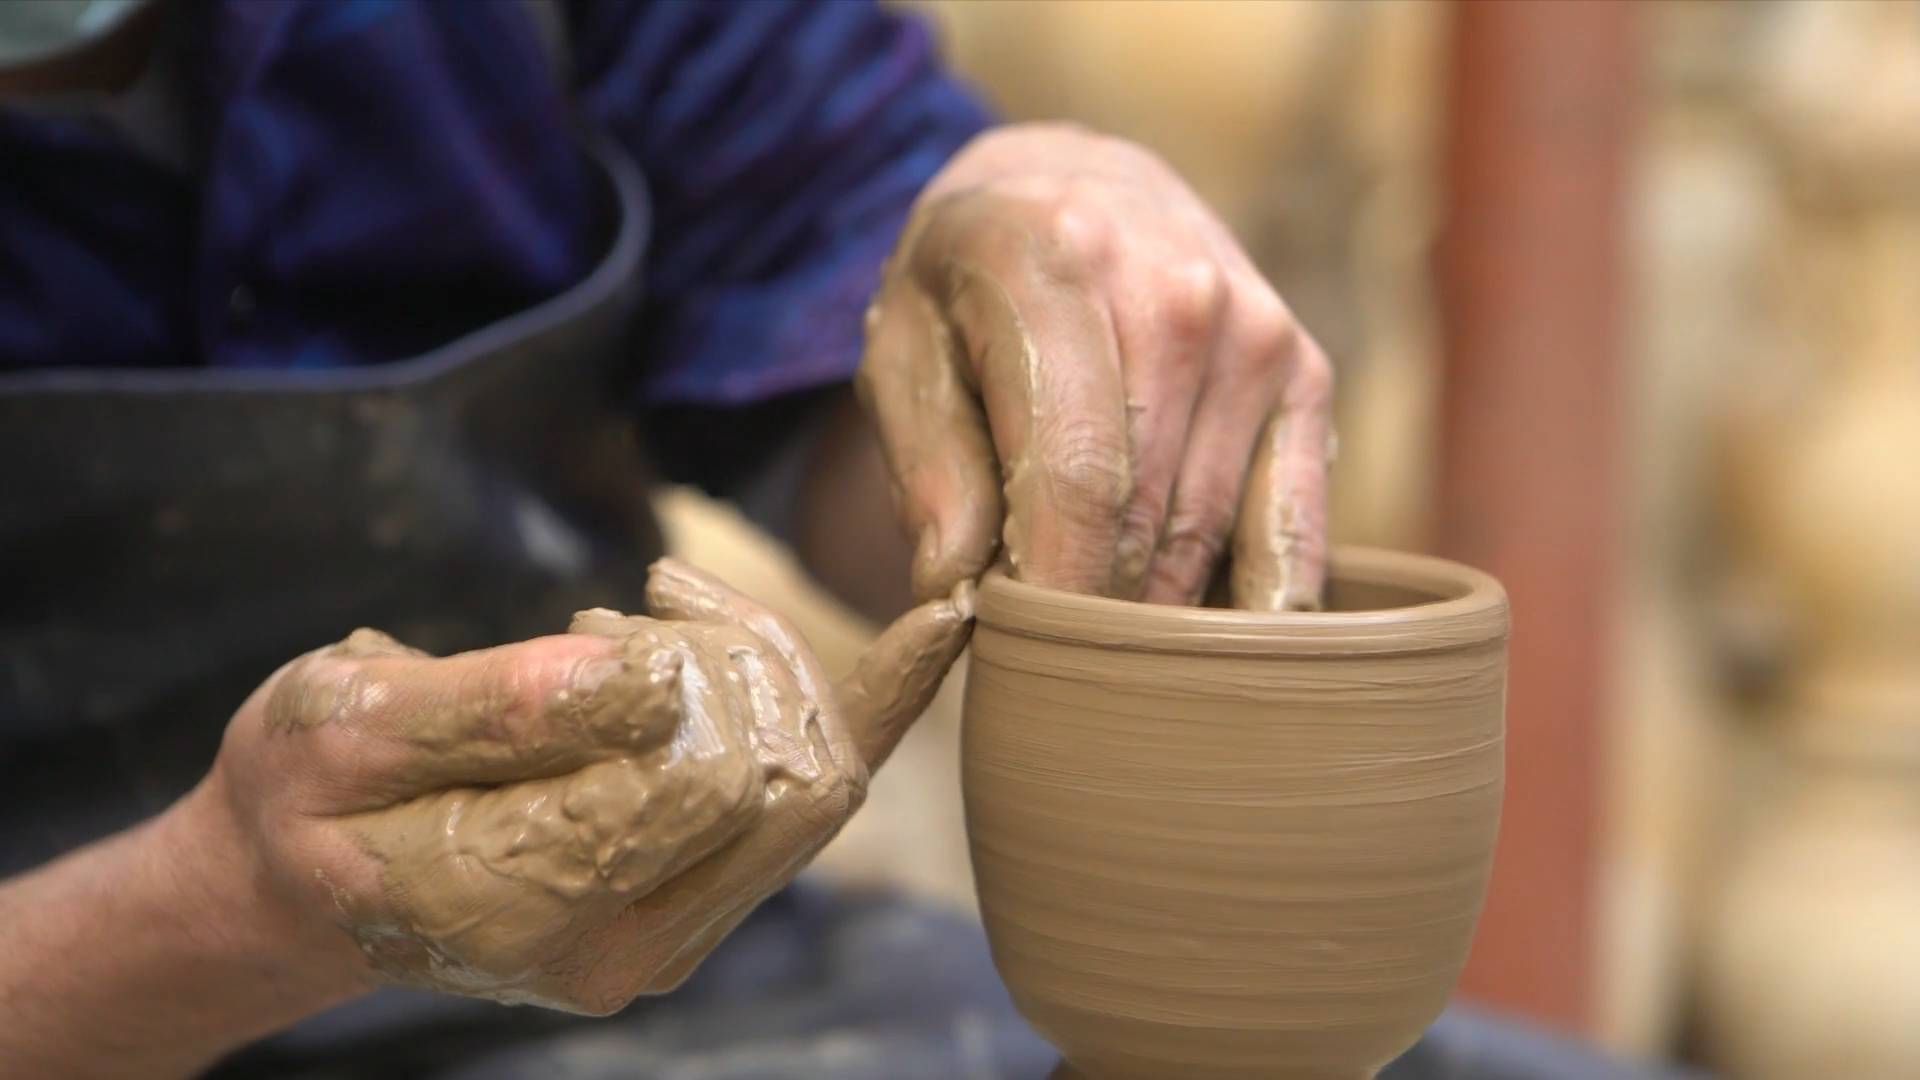 GLOBALink | Xinjiang, My home: Young inheritor of old pottery-making technique